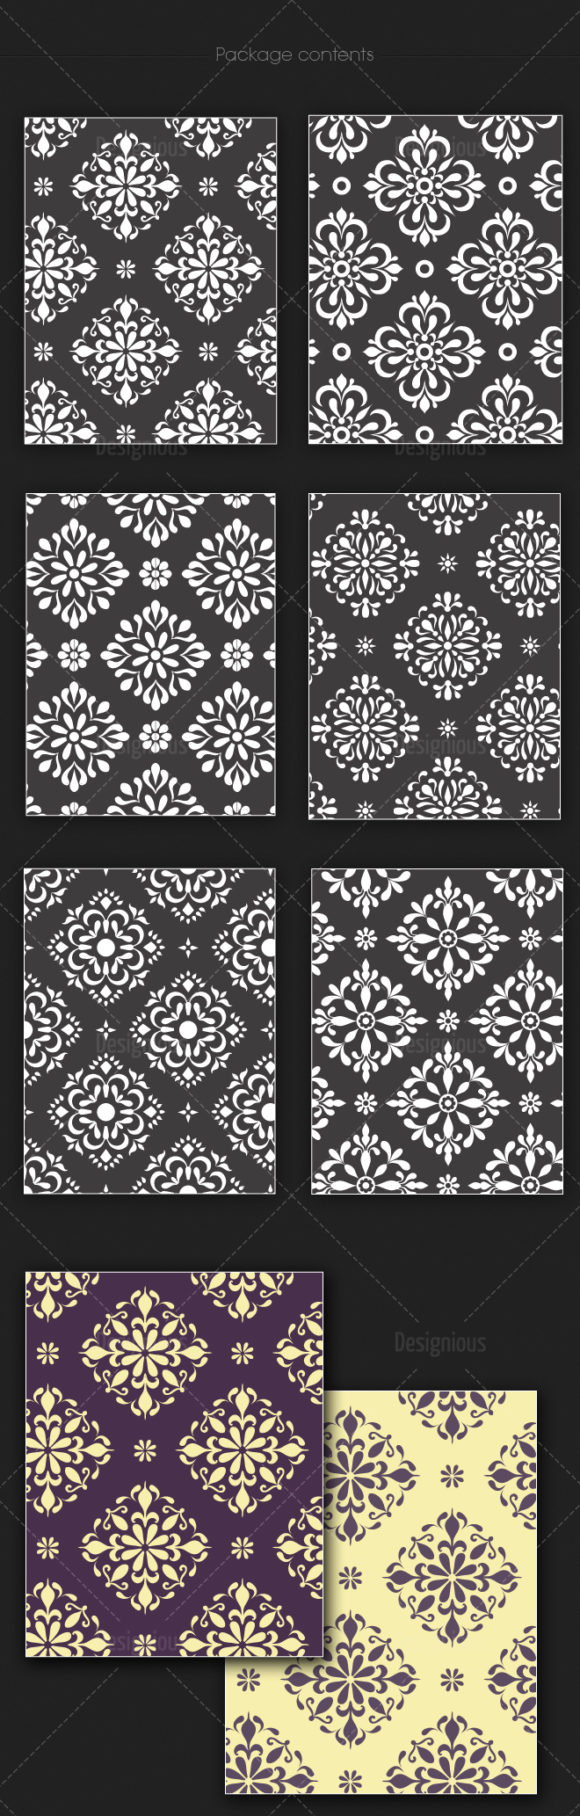 Seamless Patterns Vector Pack 138 2